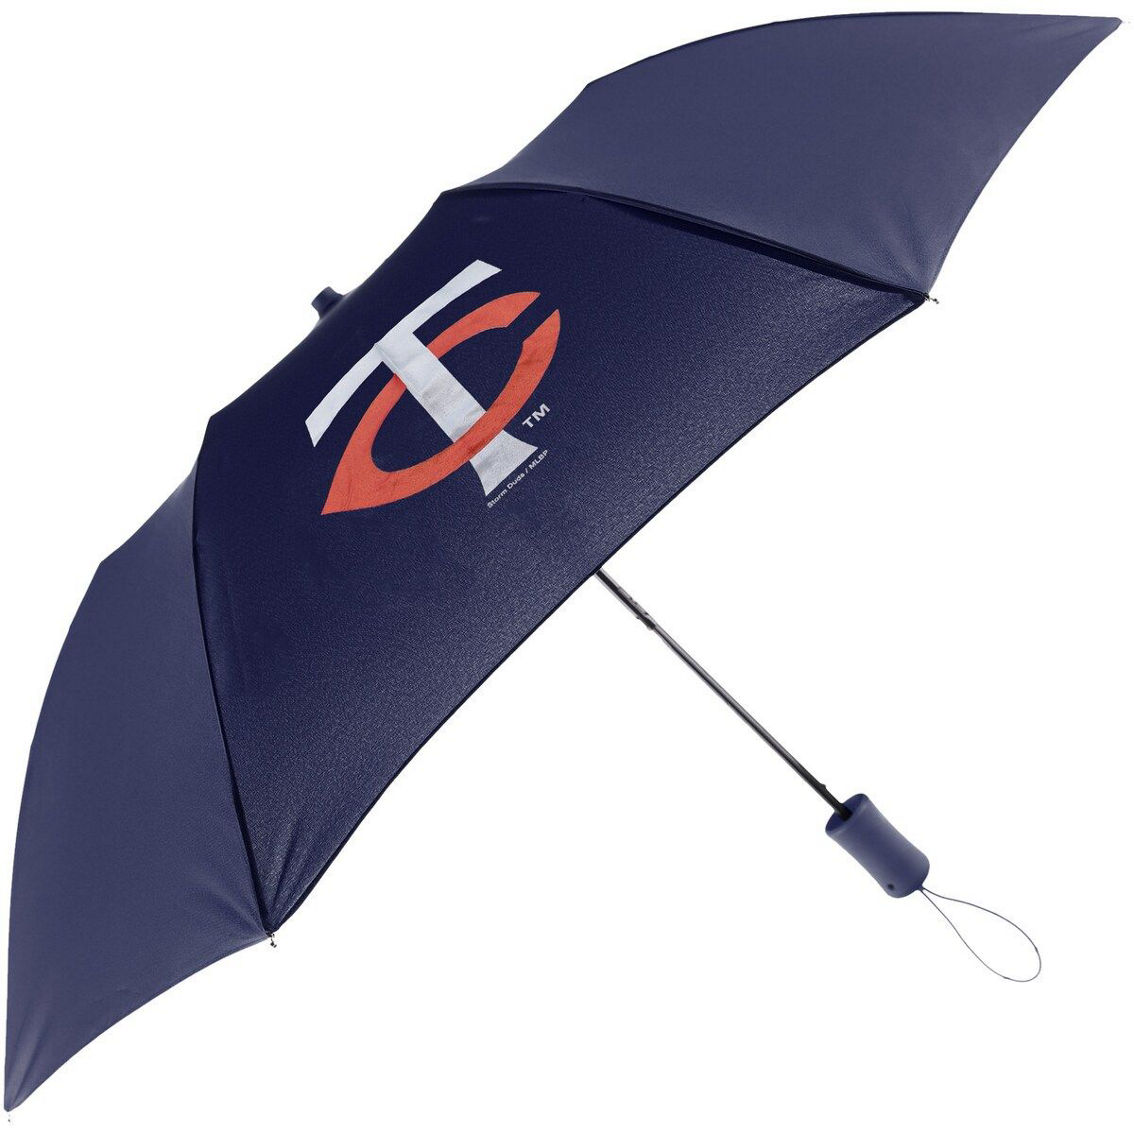 Storm Duds Minnesota Twins The Victory Umbrella - Image 2 of 2